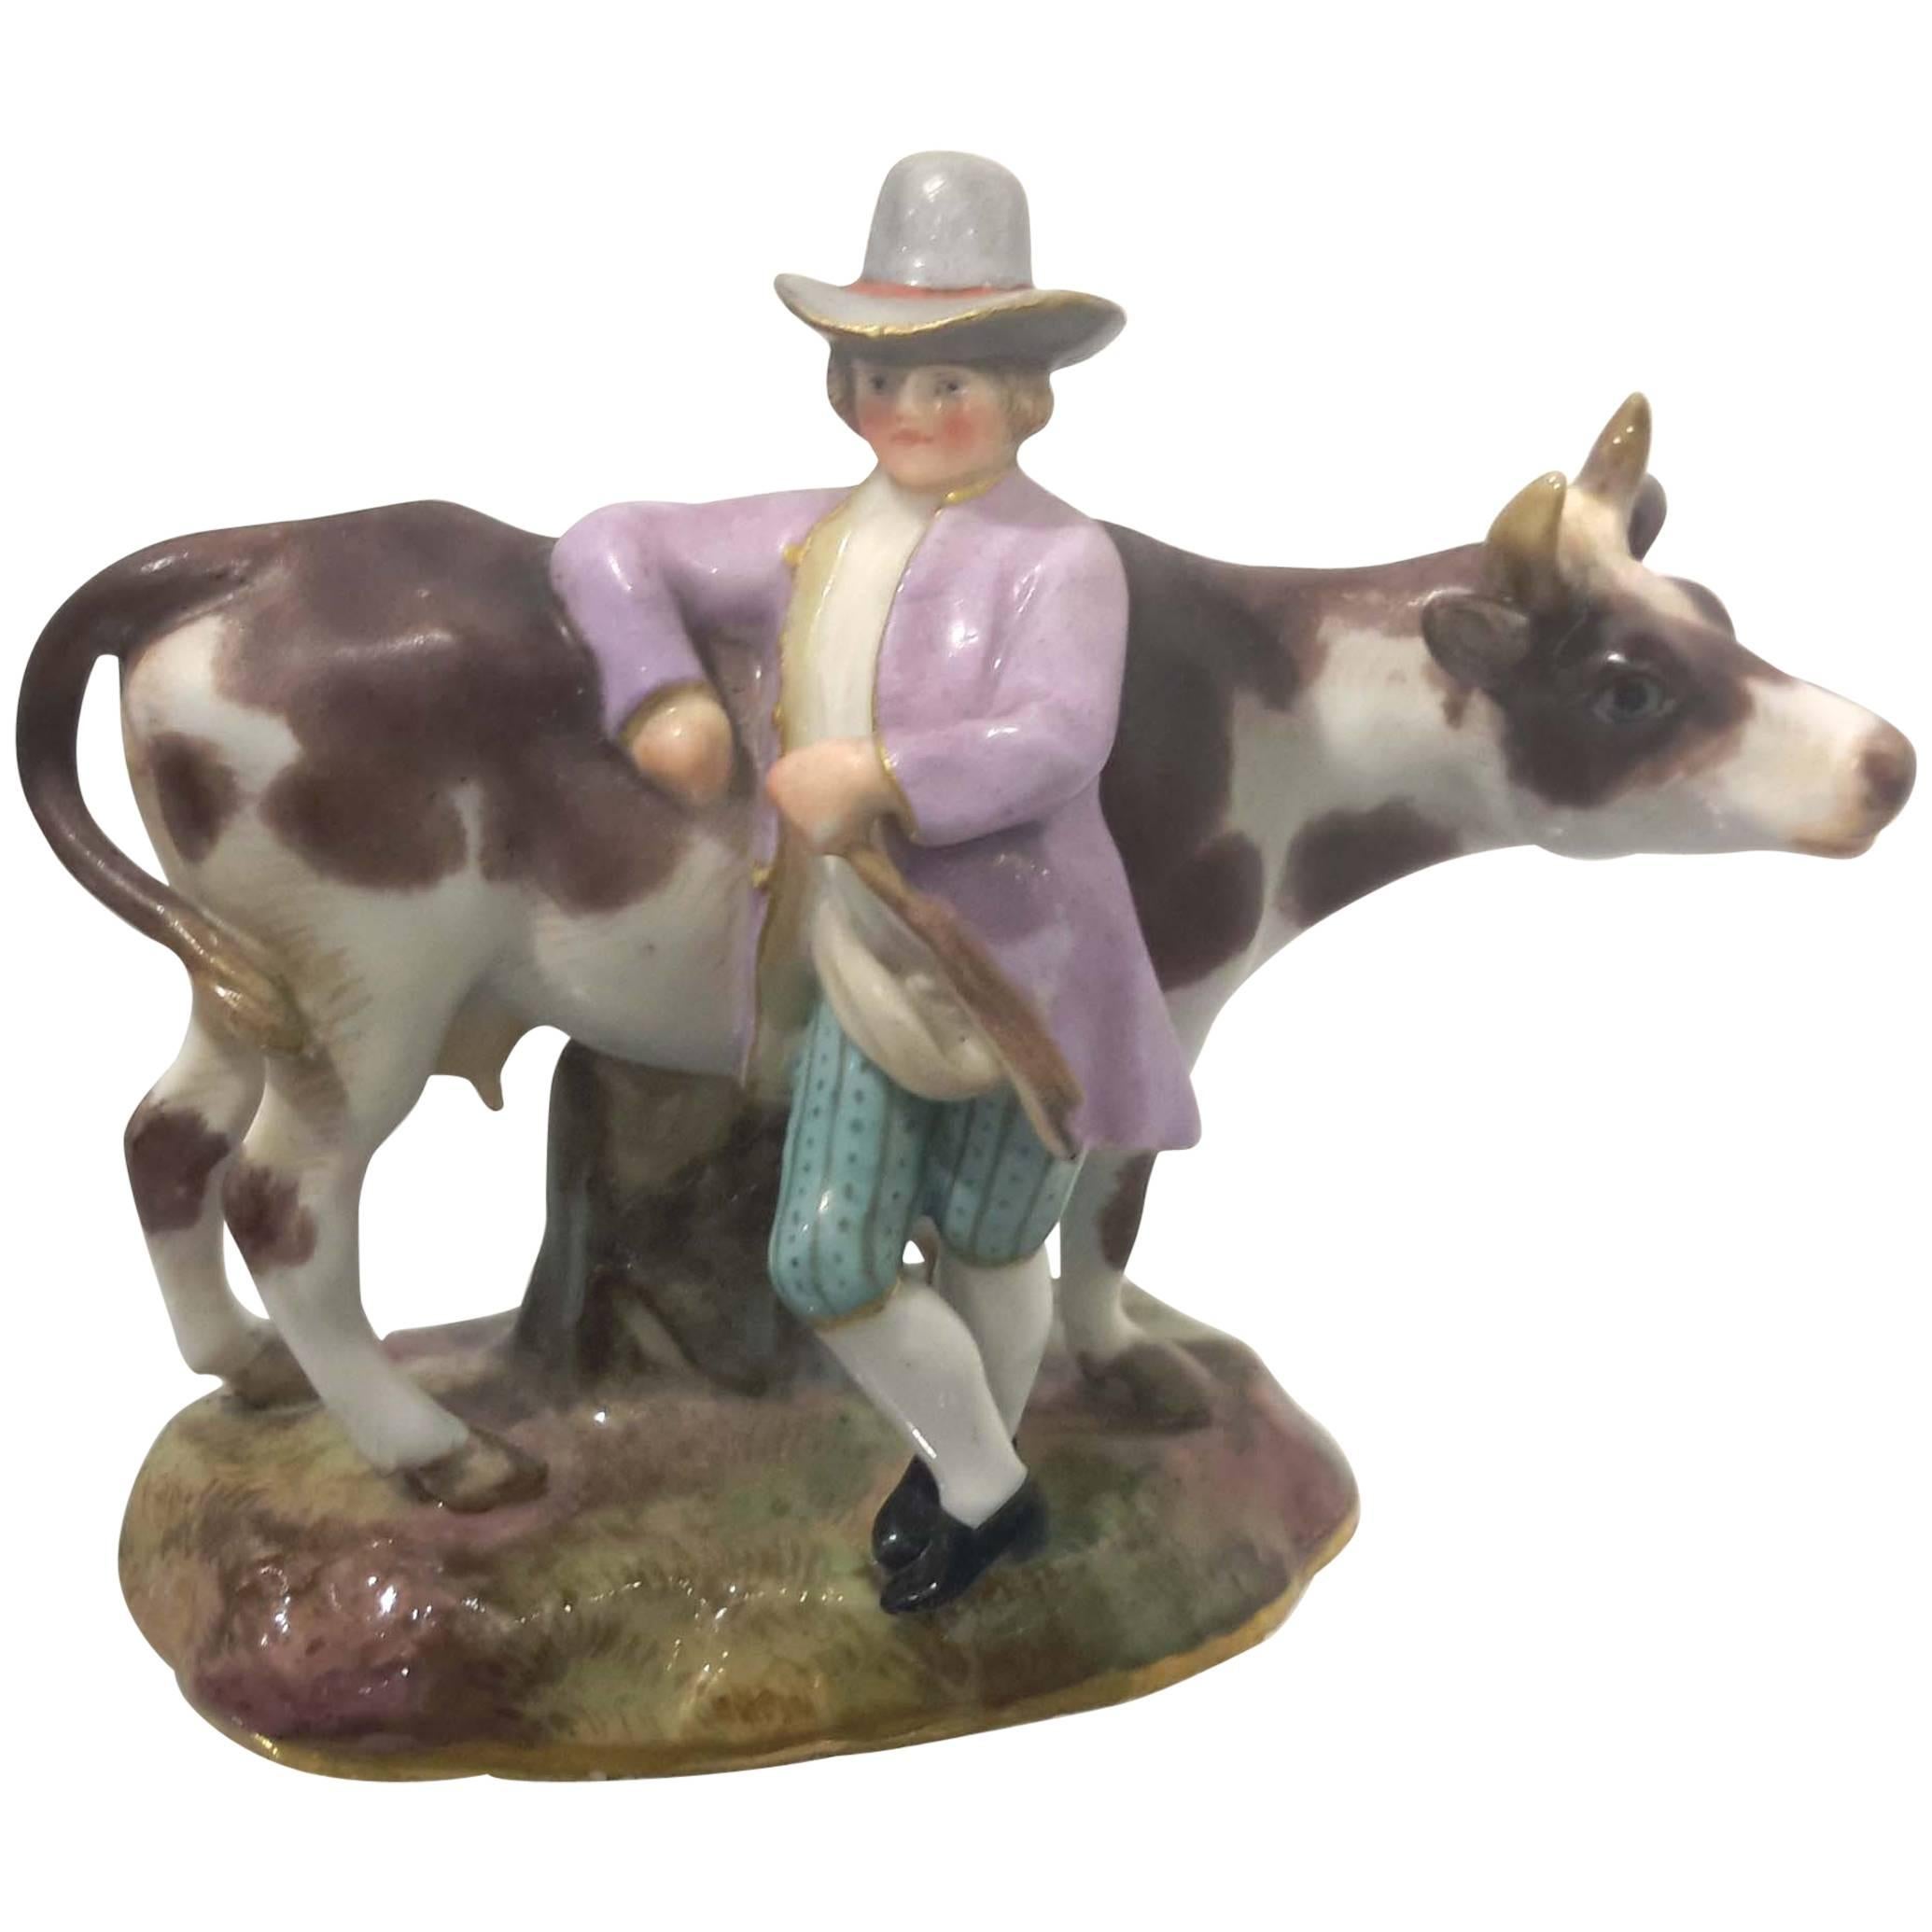 Meissen Porcelain Figure with Cow, Germany, circa 1890